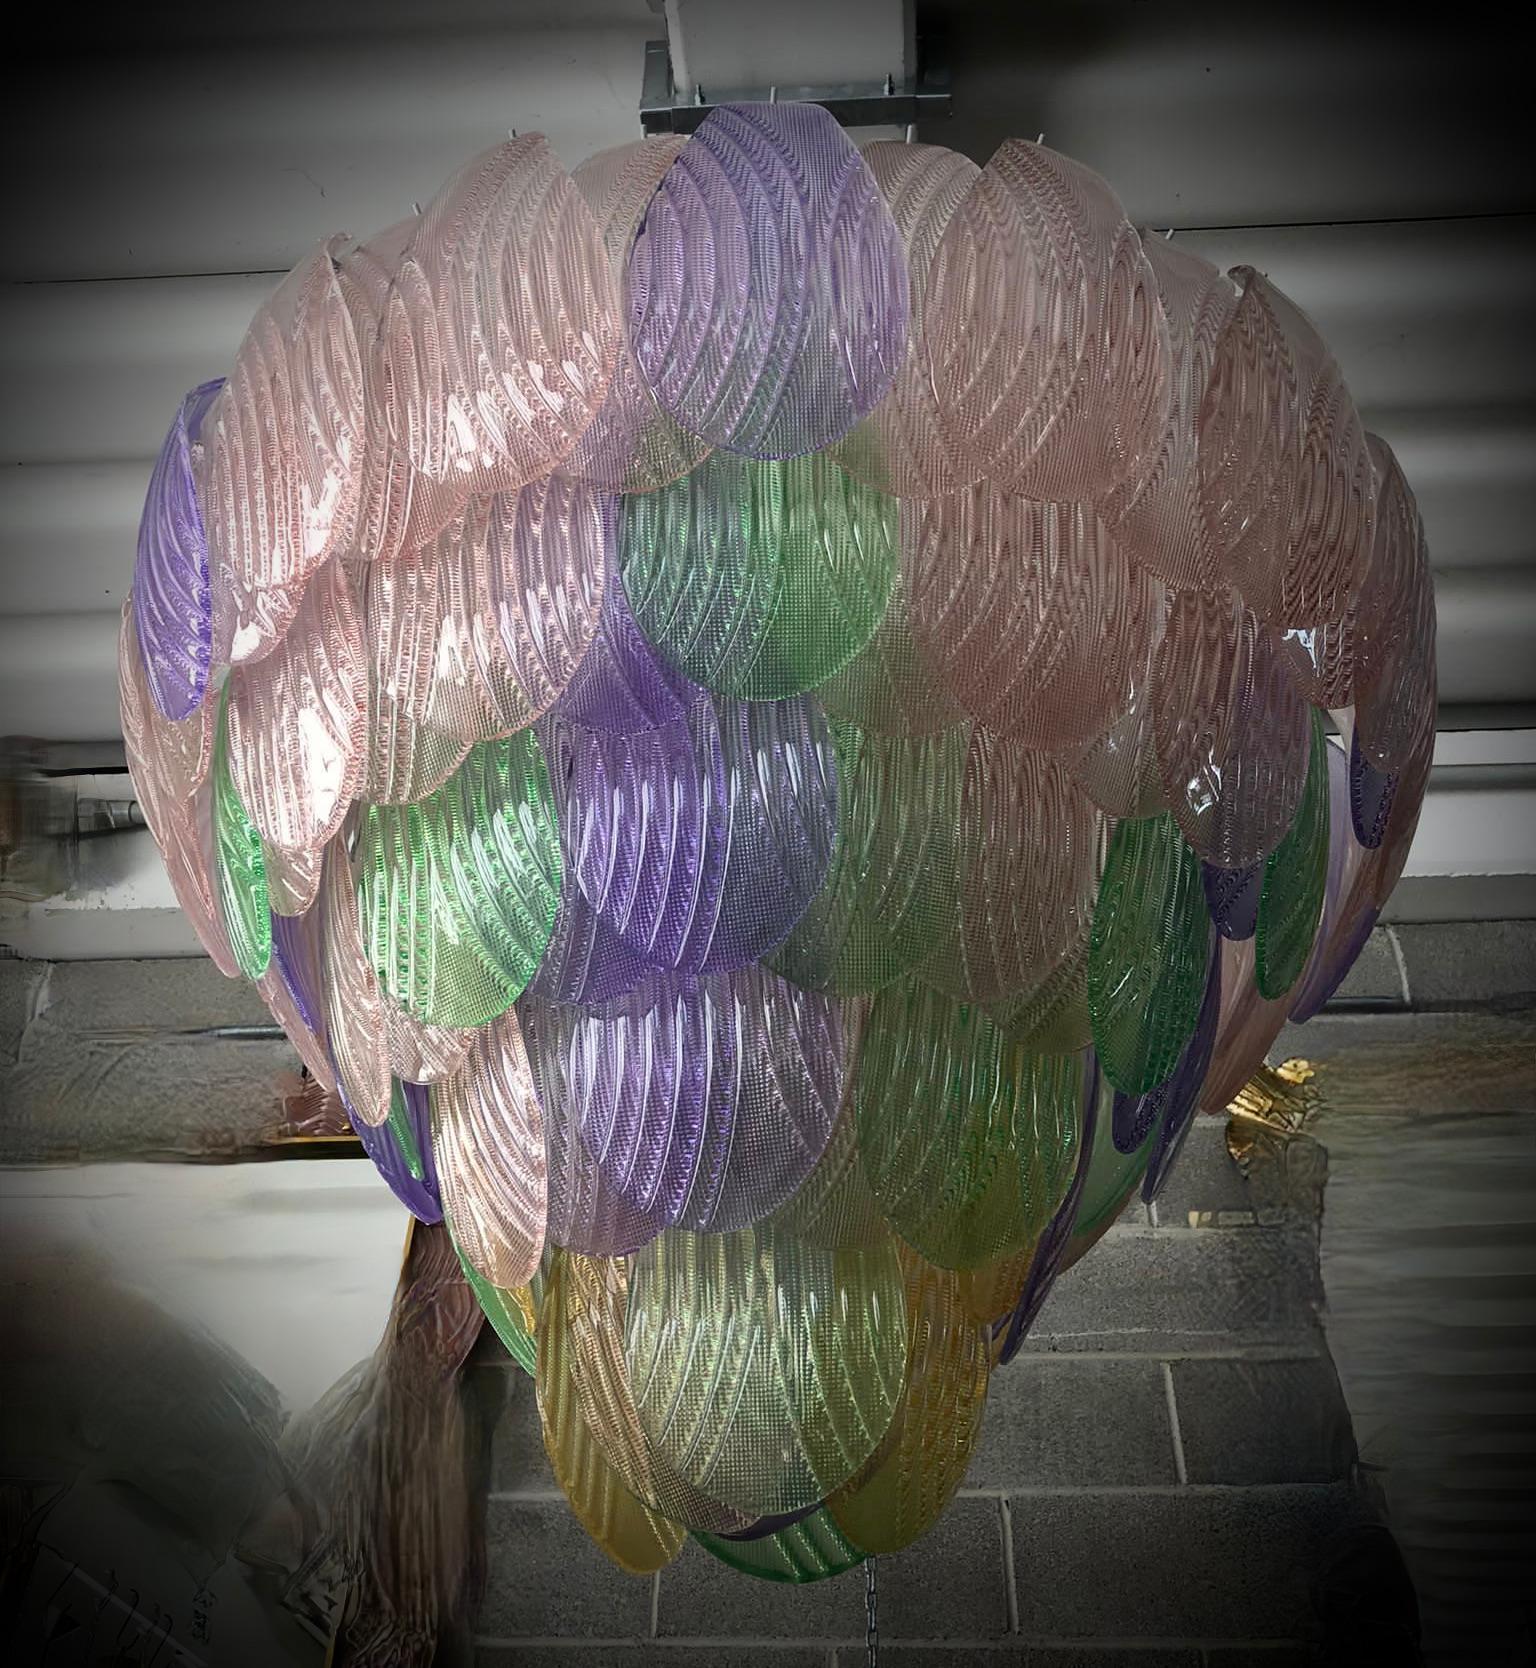 Fantastic Venetian green pink yellow and violet color for a Cascade of Murano leaves. A striking color for this chandelier. The Murano furnaces create an indisputable timeless design, simple but elegant at the same time.

All in Murano art glass